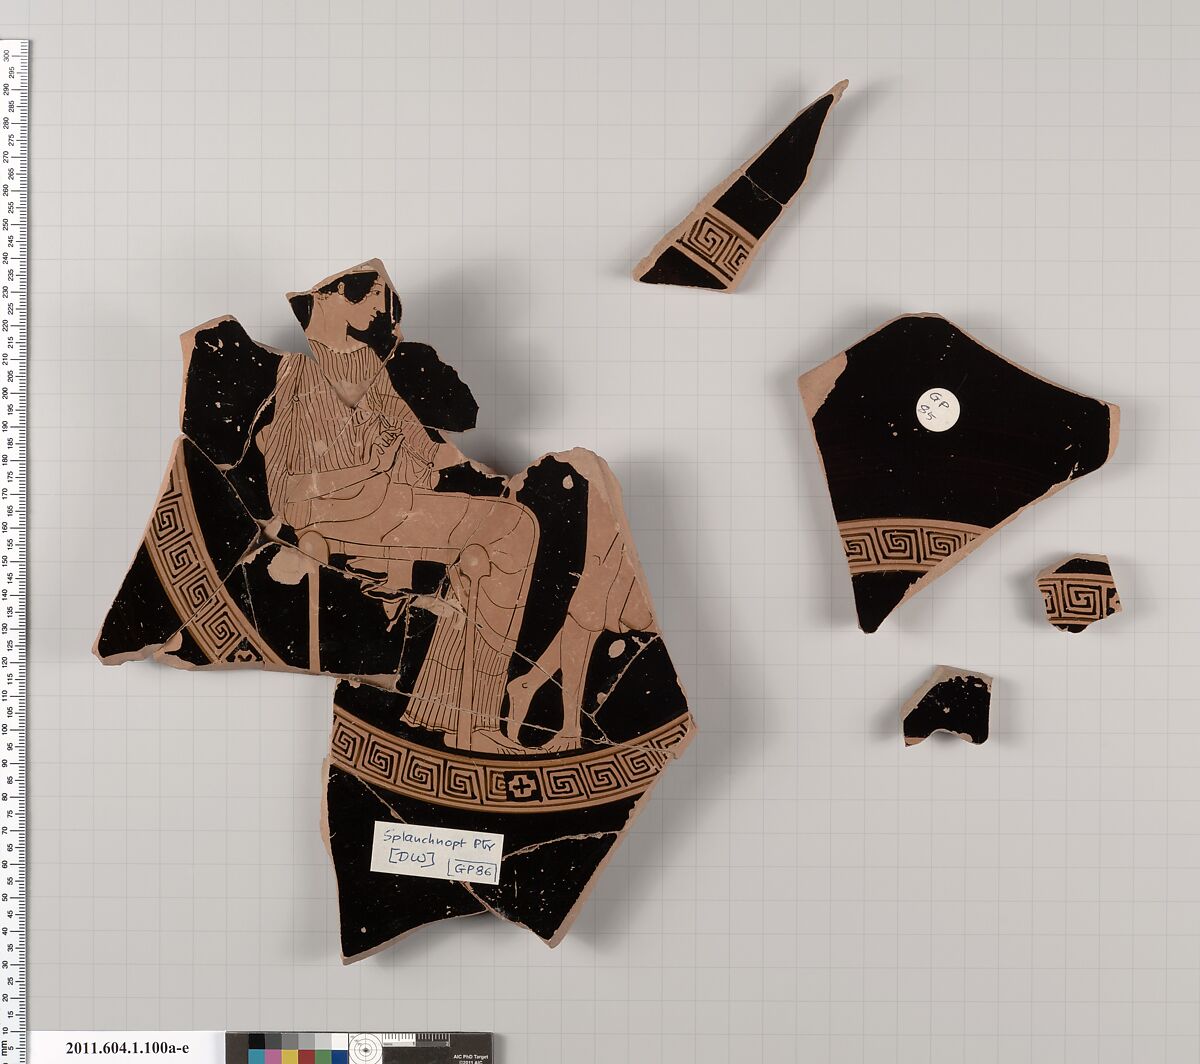 Terracotta fragments of a kylix (drinking cup), Attributed to the Splanchnopt Painter [Dyfri Williams], Terracotta, Greek, Attic 